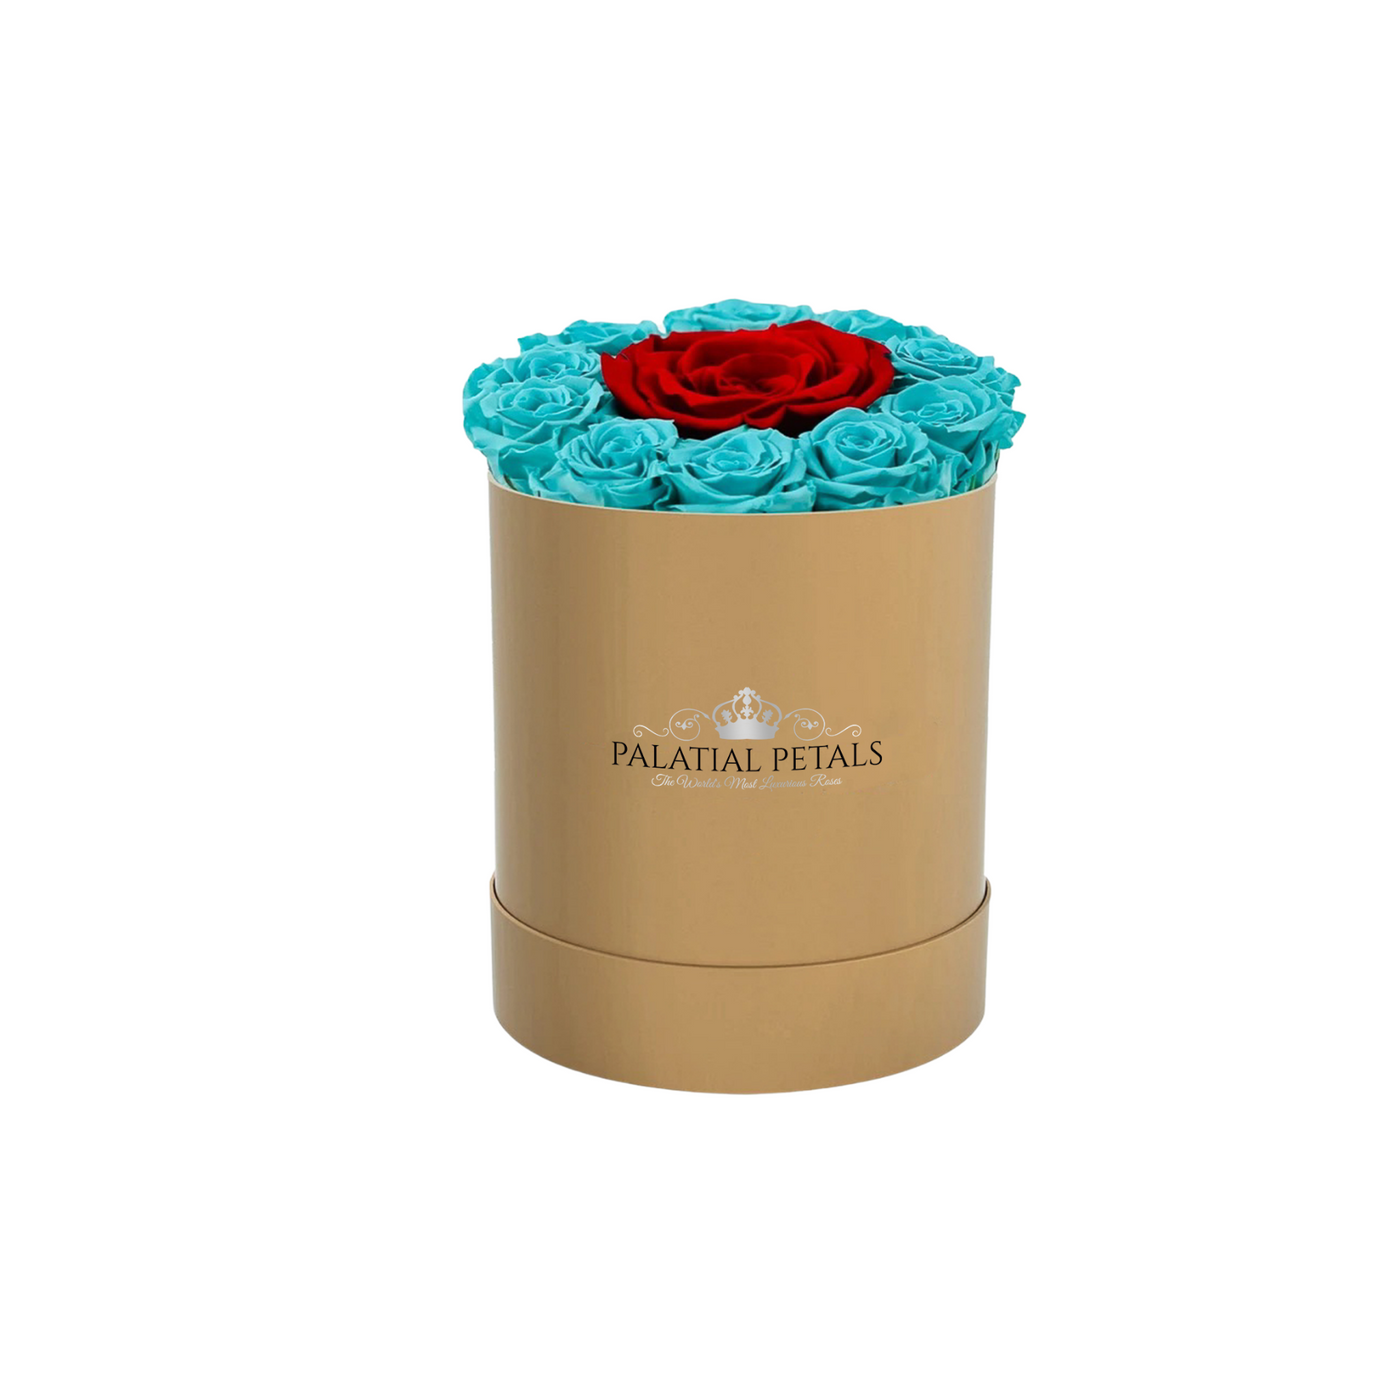 Tiffany Blue & Red Roses - Petite